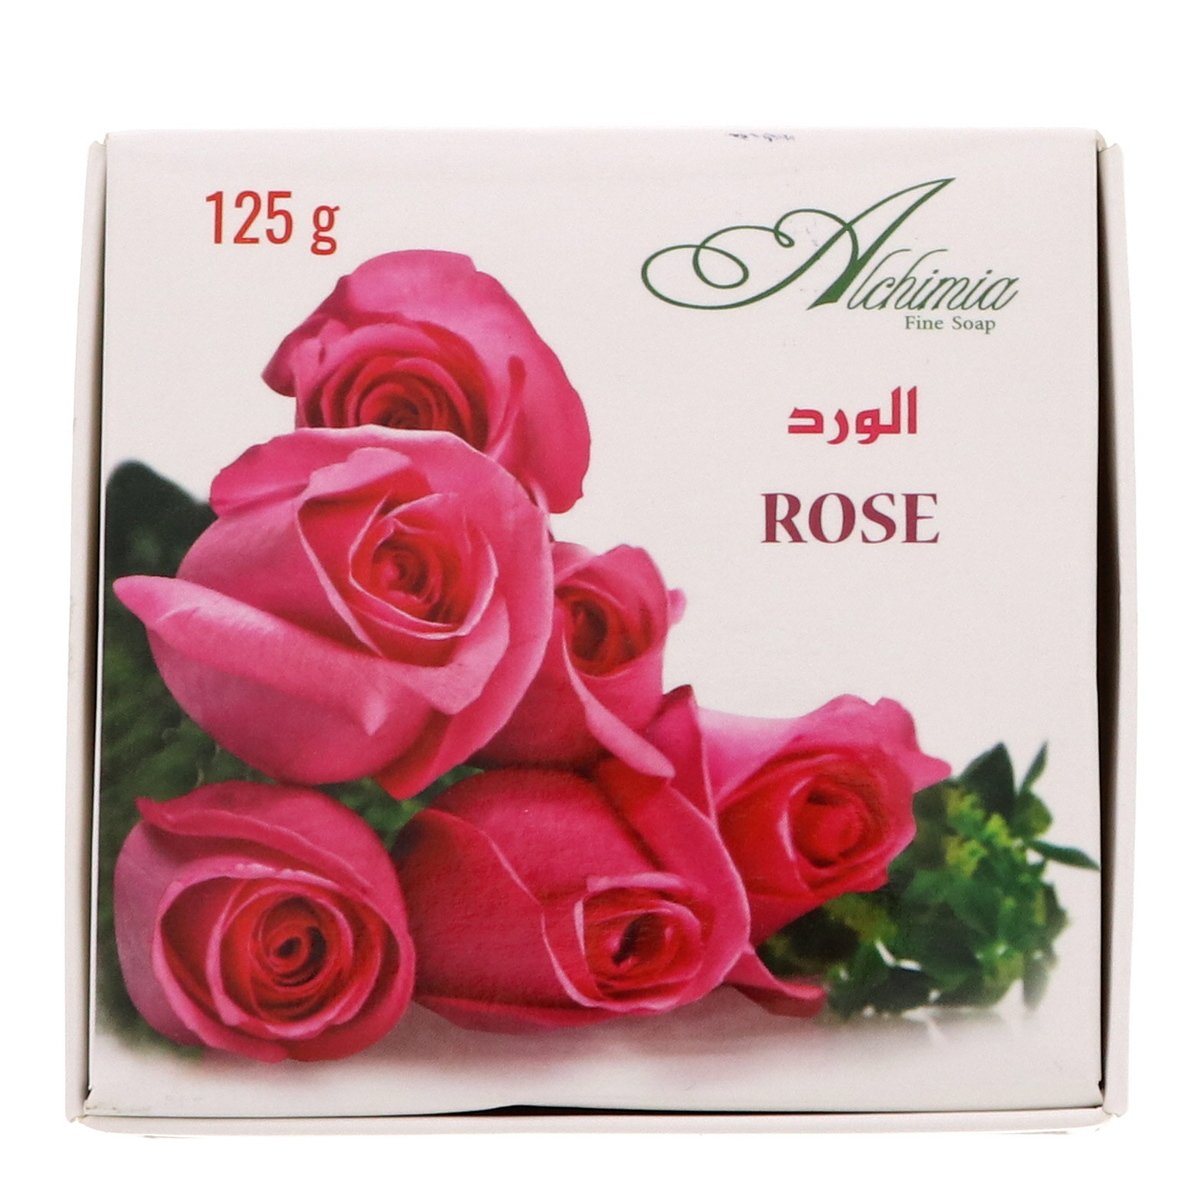 Alchimia Soap With Rose Fragrance 125 g